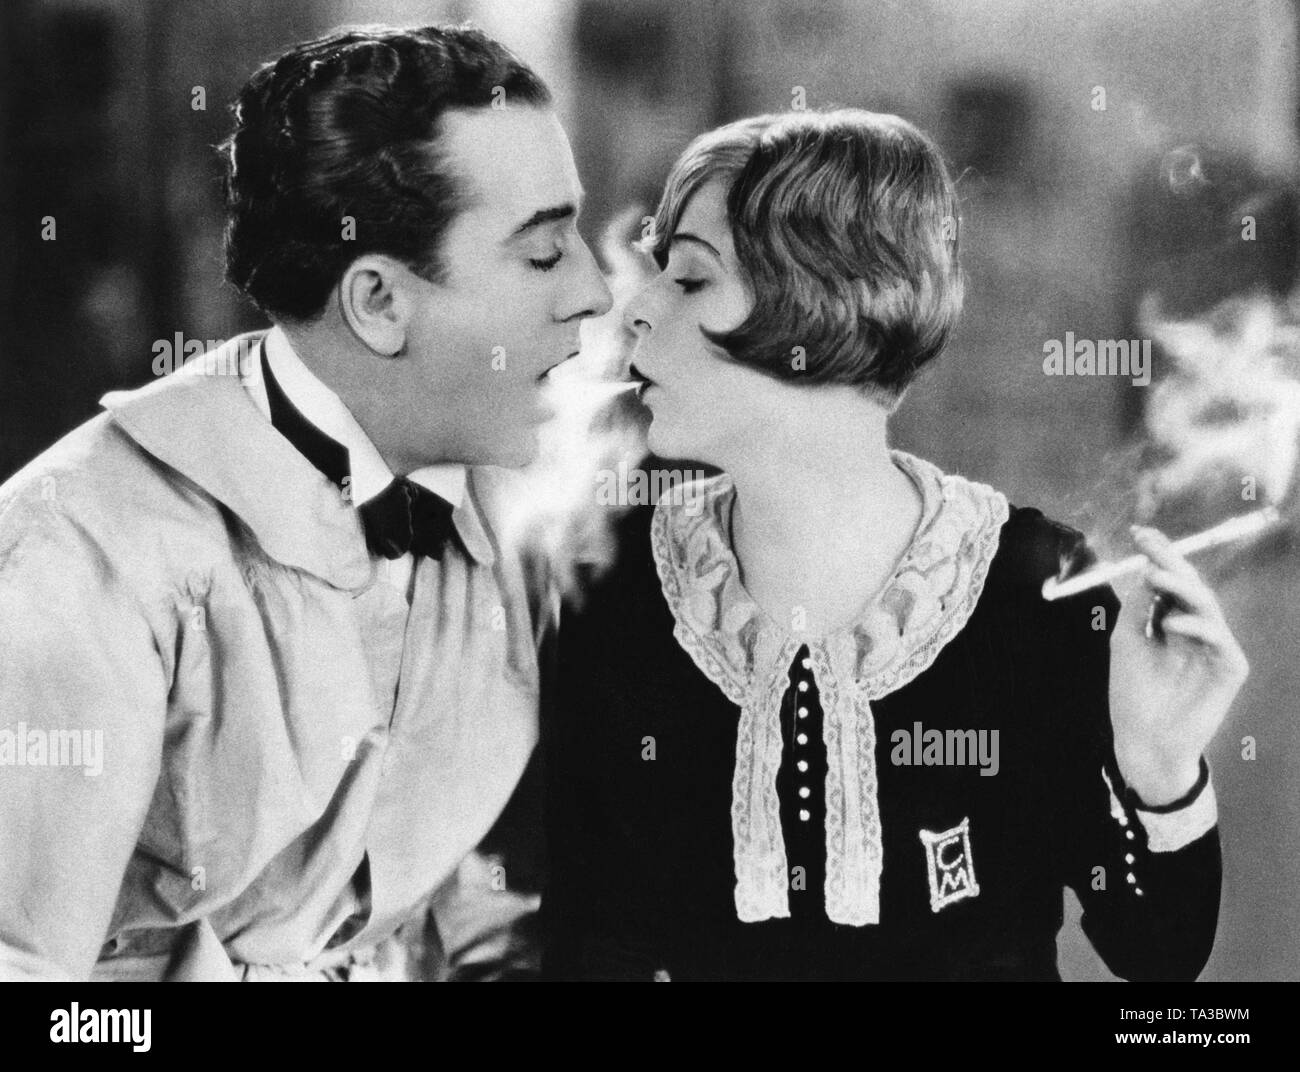 The American actors Jack Mulhall and Blanche Sweet together in a movie scene. Sweet has a 1920s style hairdo, the bob cut. Stock Photo